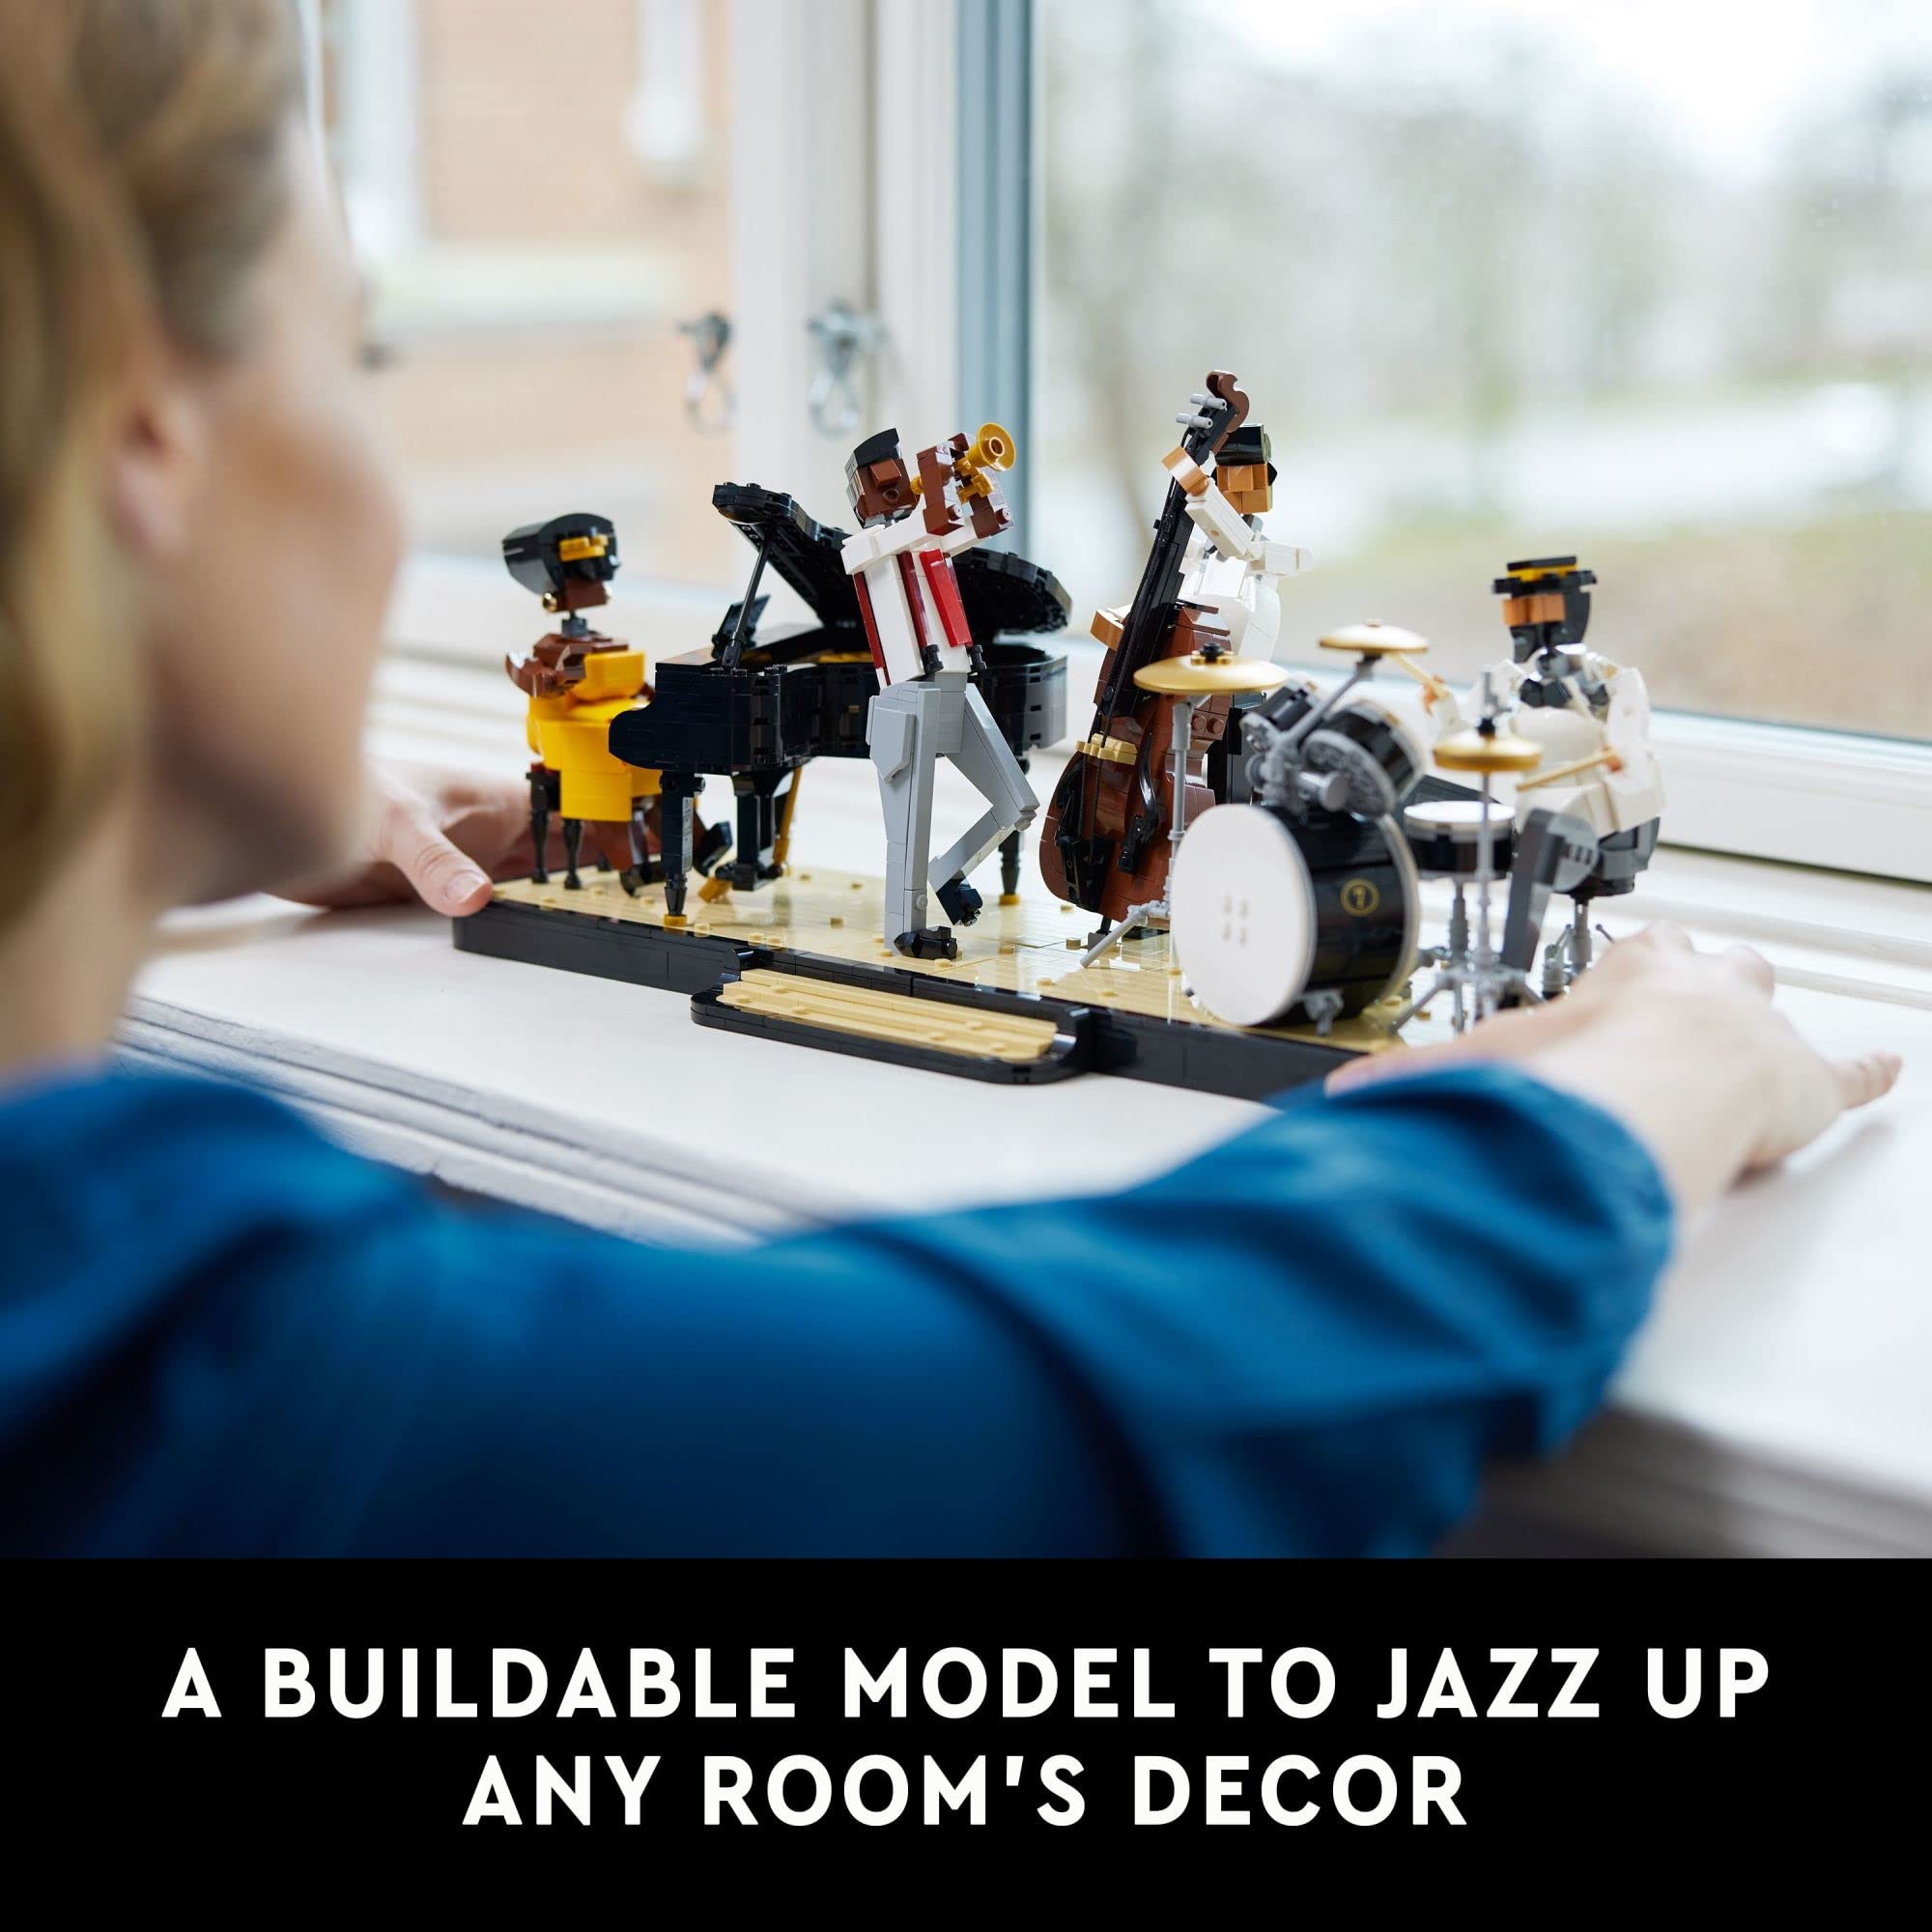 LEGO Ideas Jazz Quartet 21334, Set for Adults, Gift for Music Lovers with Band Figures and 4 Instruments: Piano, Double Bass, Trumpet & a Drum Kit